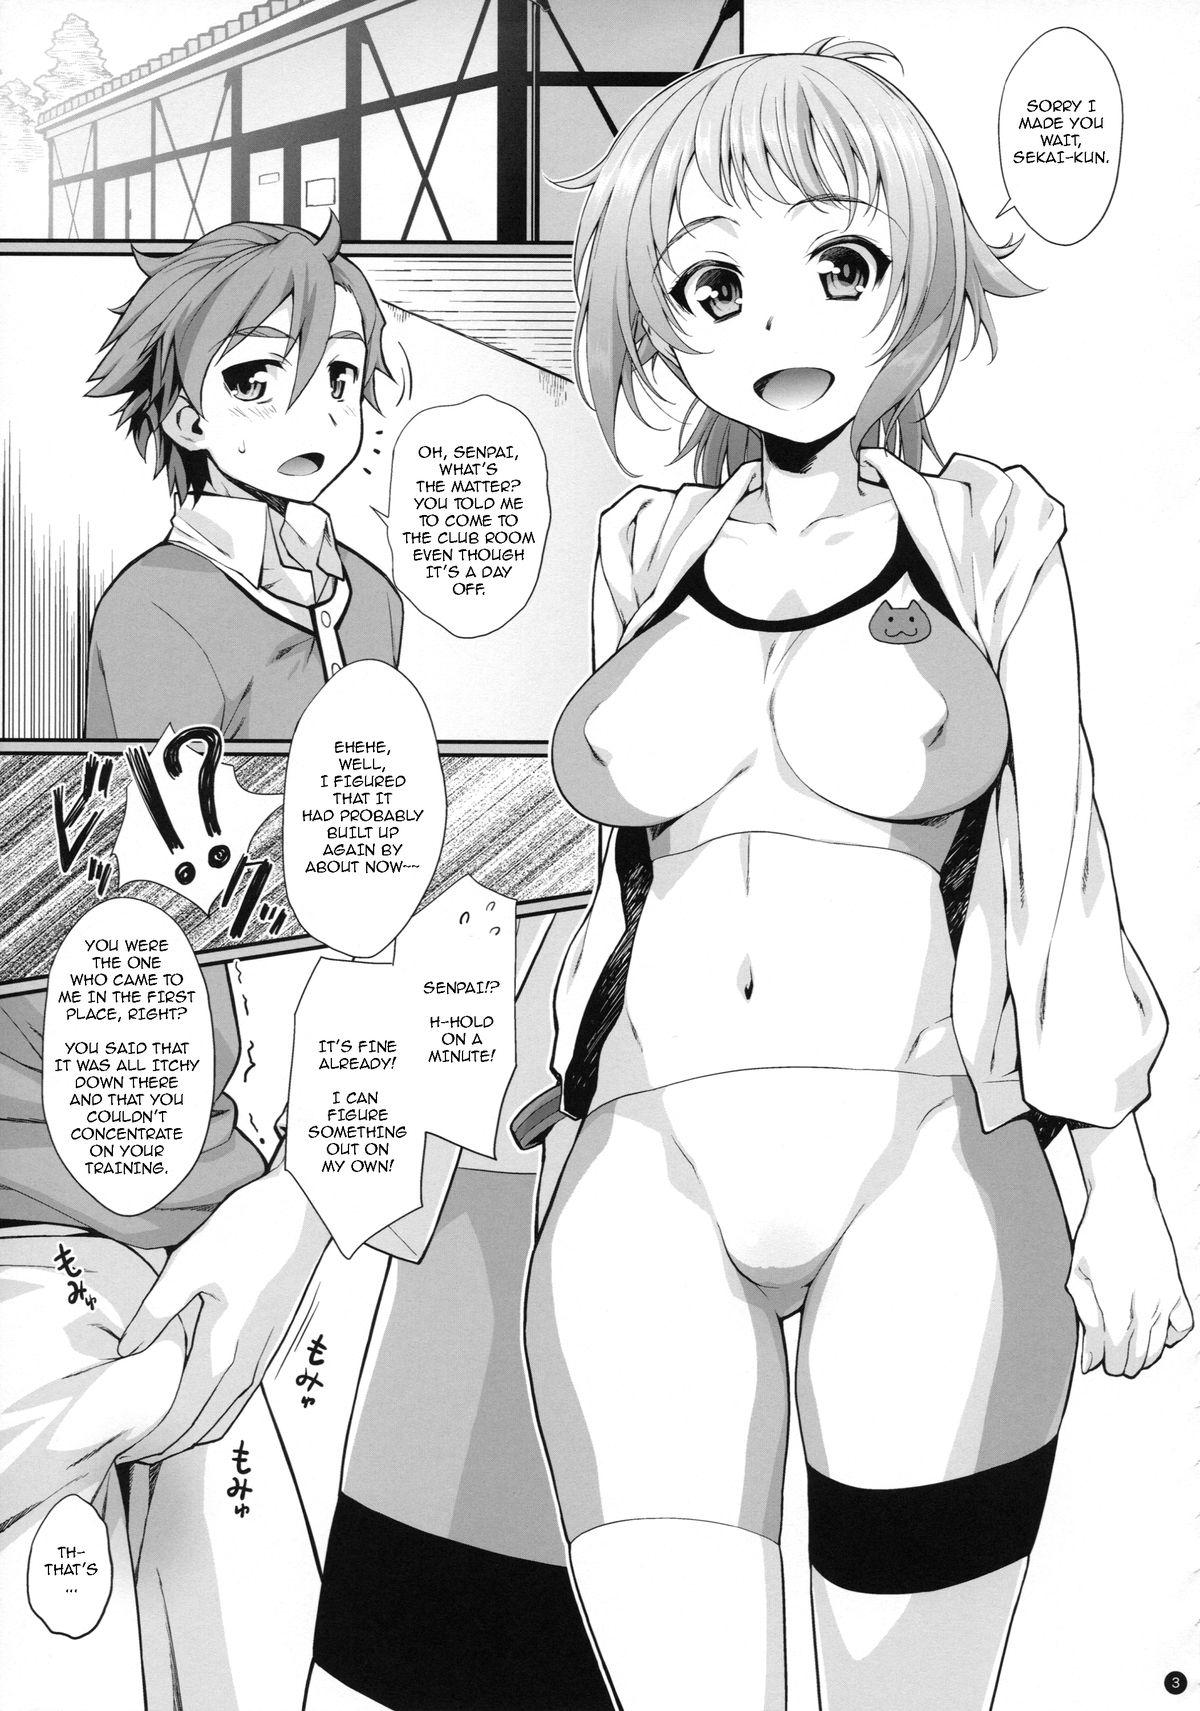 Boys TRY ESCALATION - Gundam build fighters try Mofos - Page 5